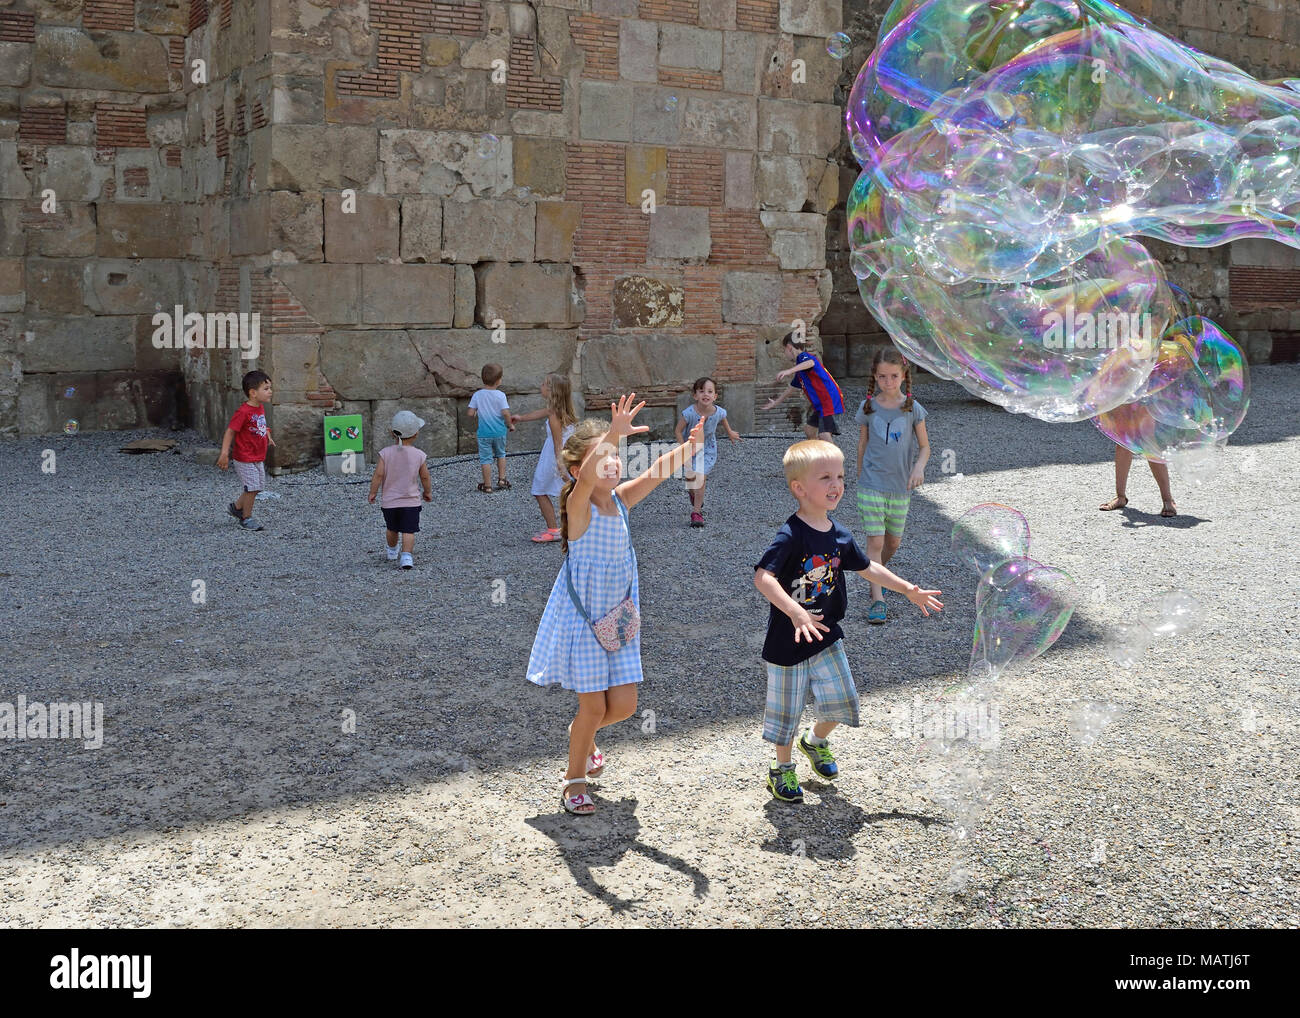 Barcelona, Catalonia, Spain, Europe. 30. 06. 2017. Children are playing with bubbles in the Gothic Quarter in Barcelona. Stock Photo